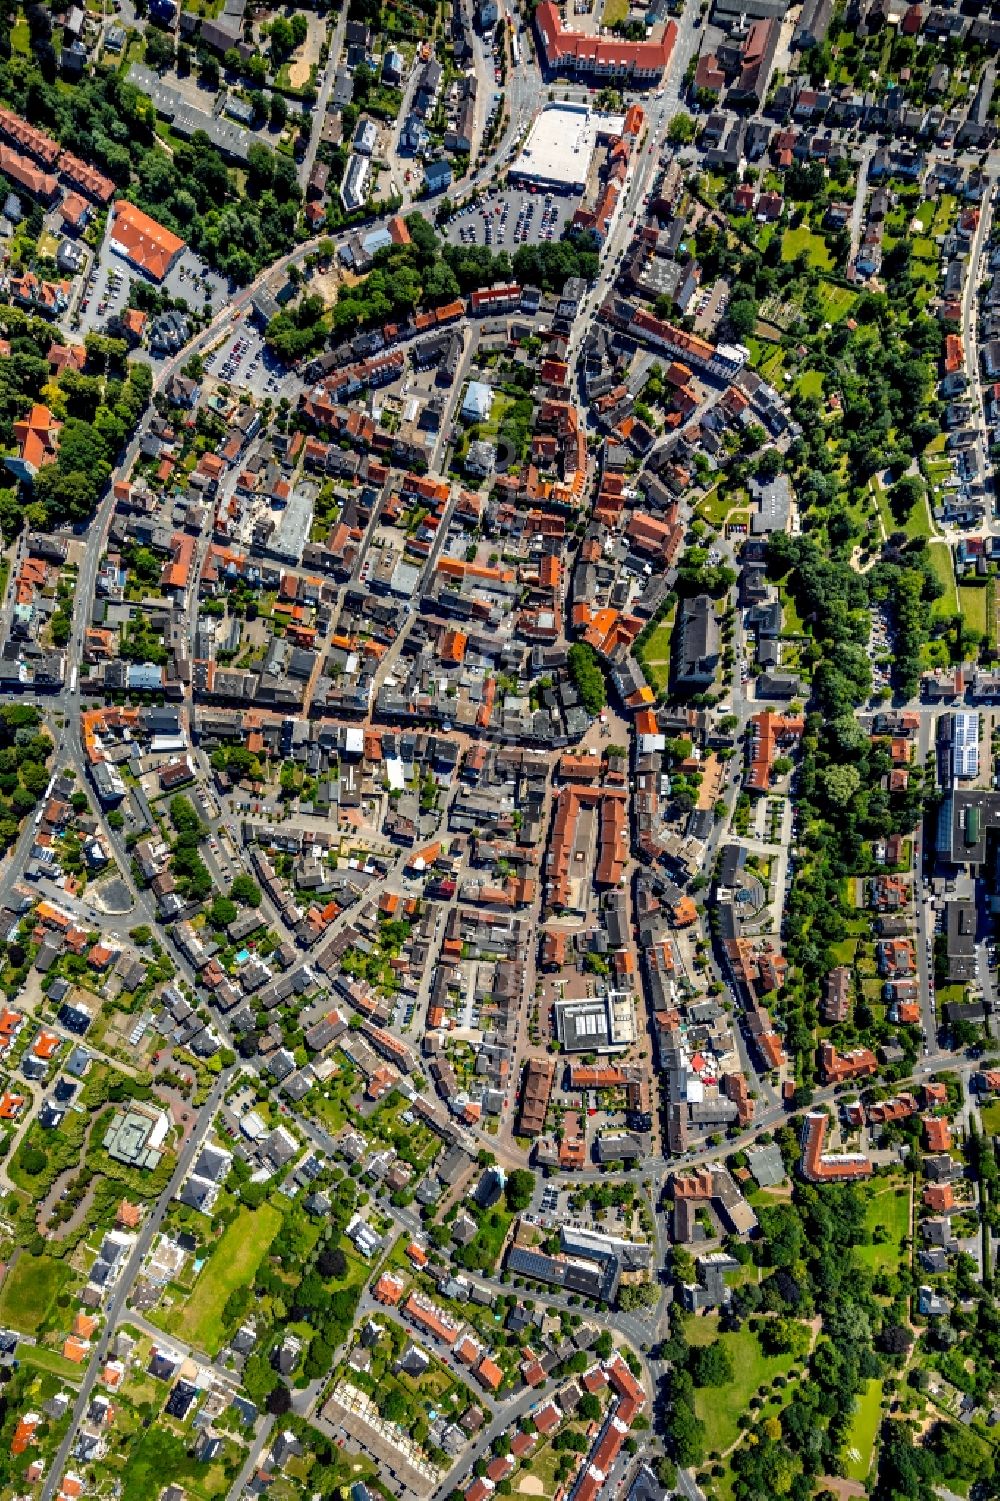 Beckum from above - Old Town area and city center in Beckum in the state North Rhine-Westphalia, Germany